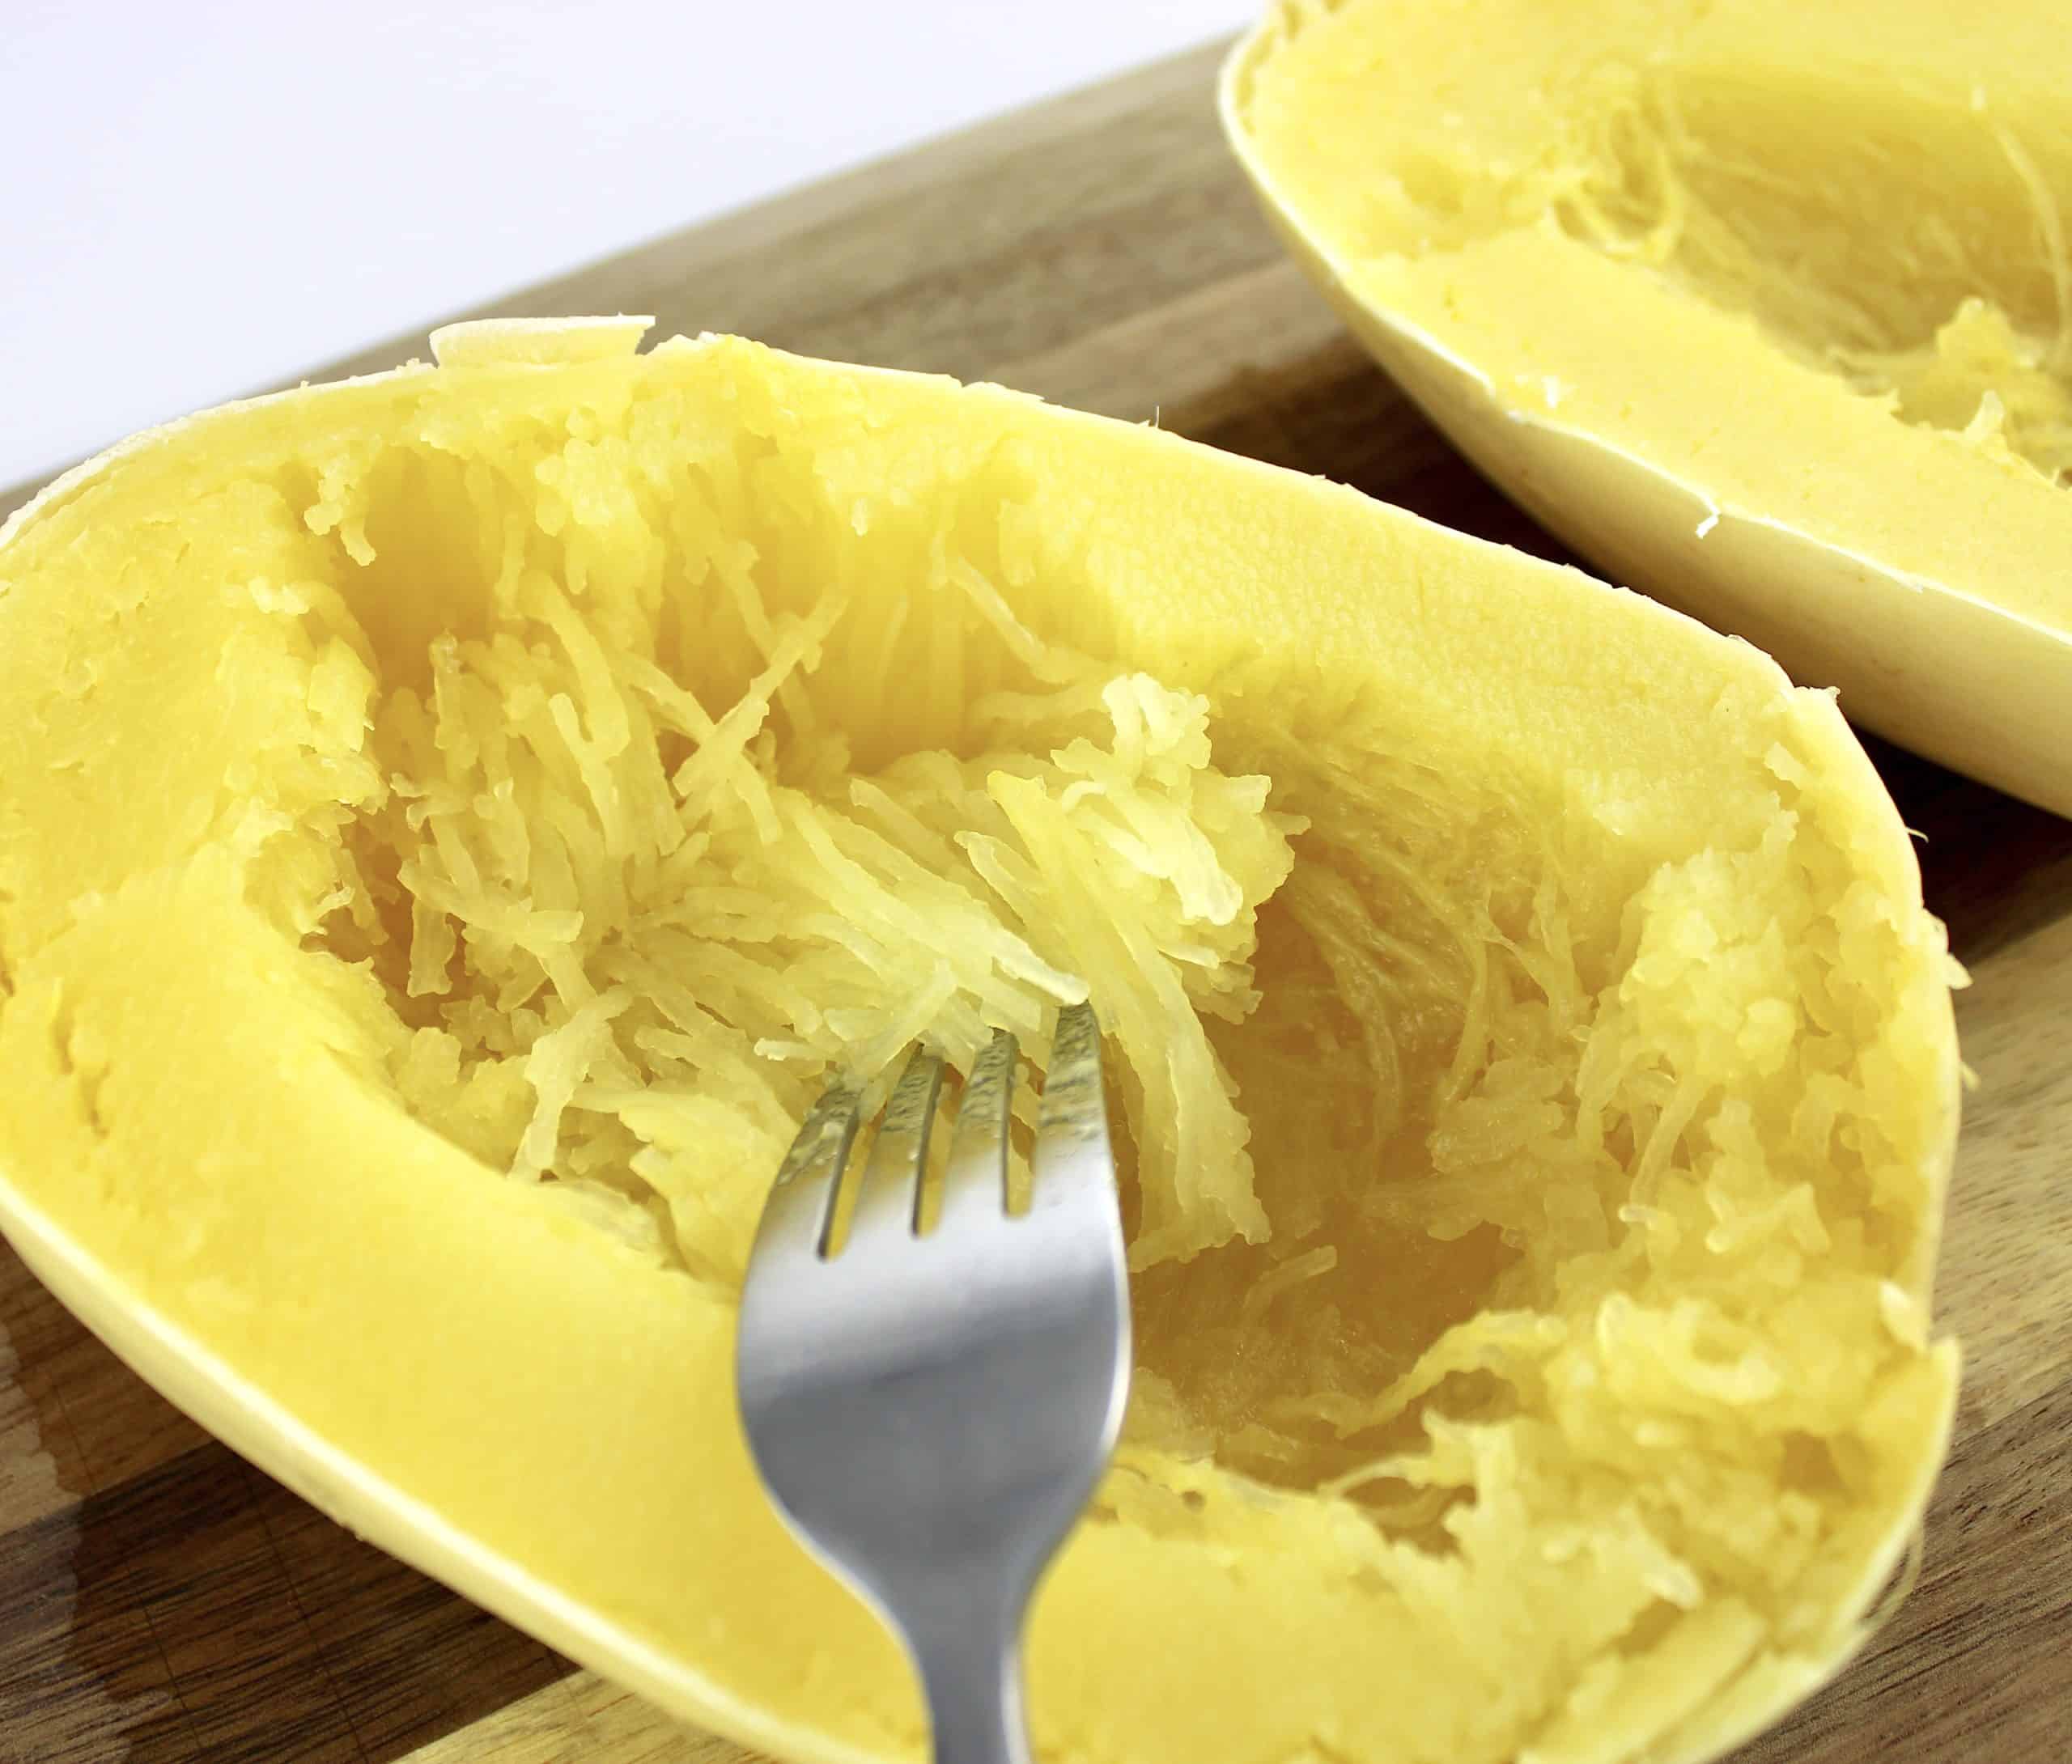 spaghetti squash strands being separated with fork